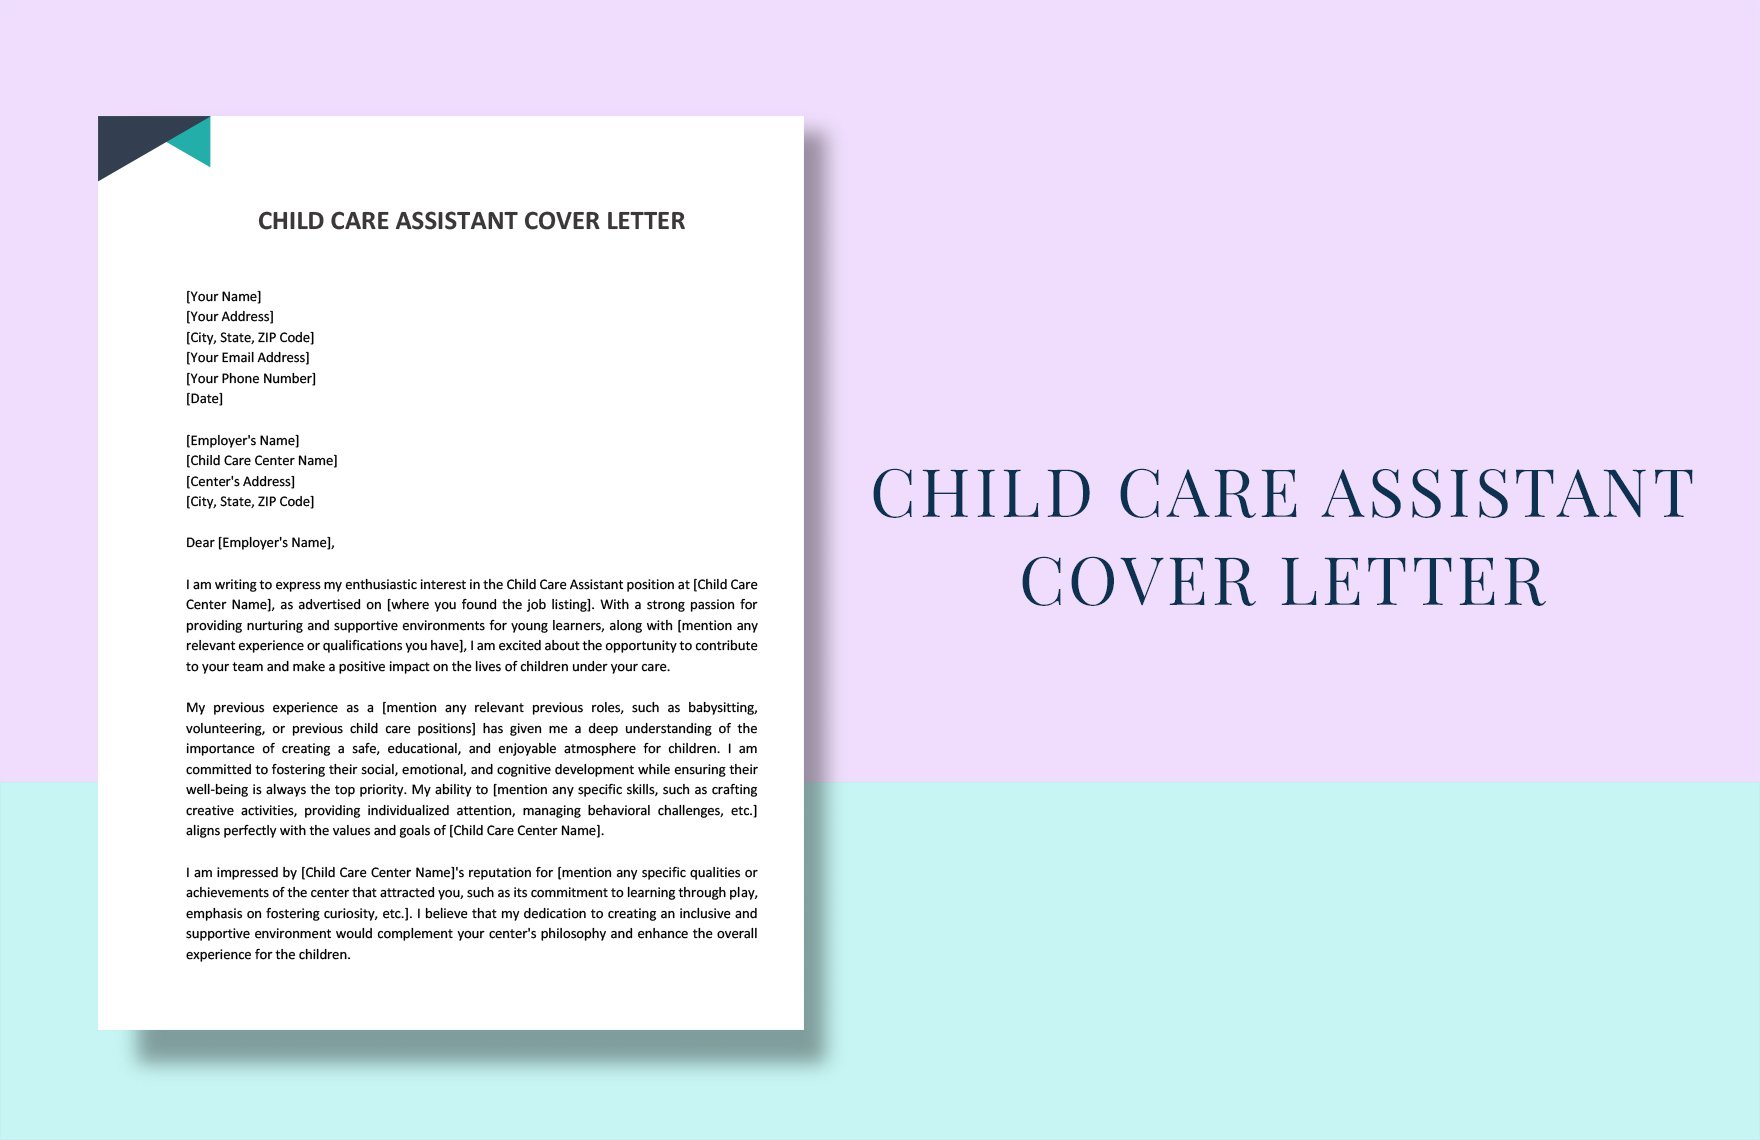 Child Care Assistant Cover Letter